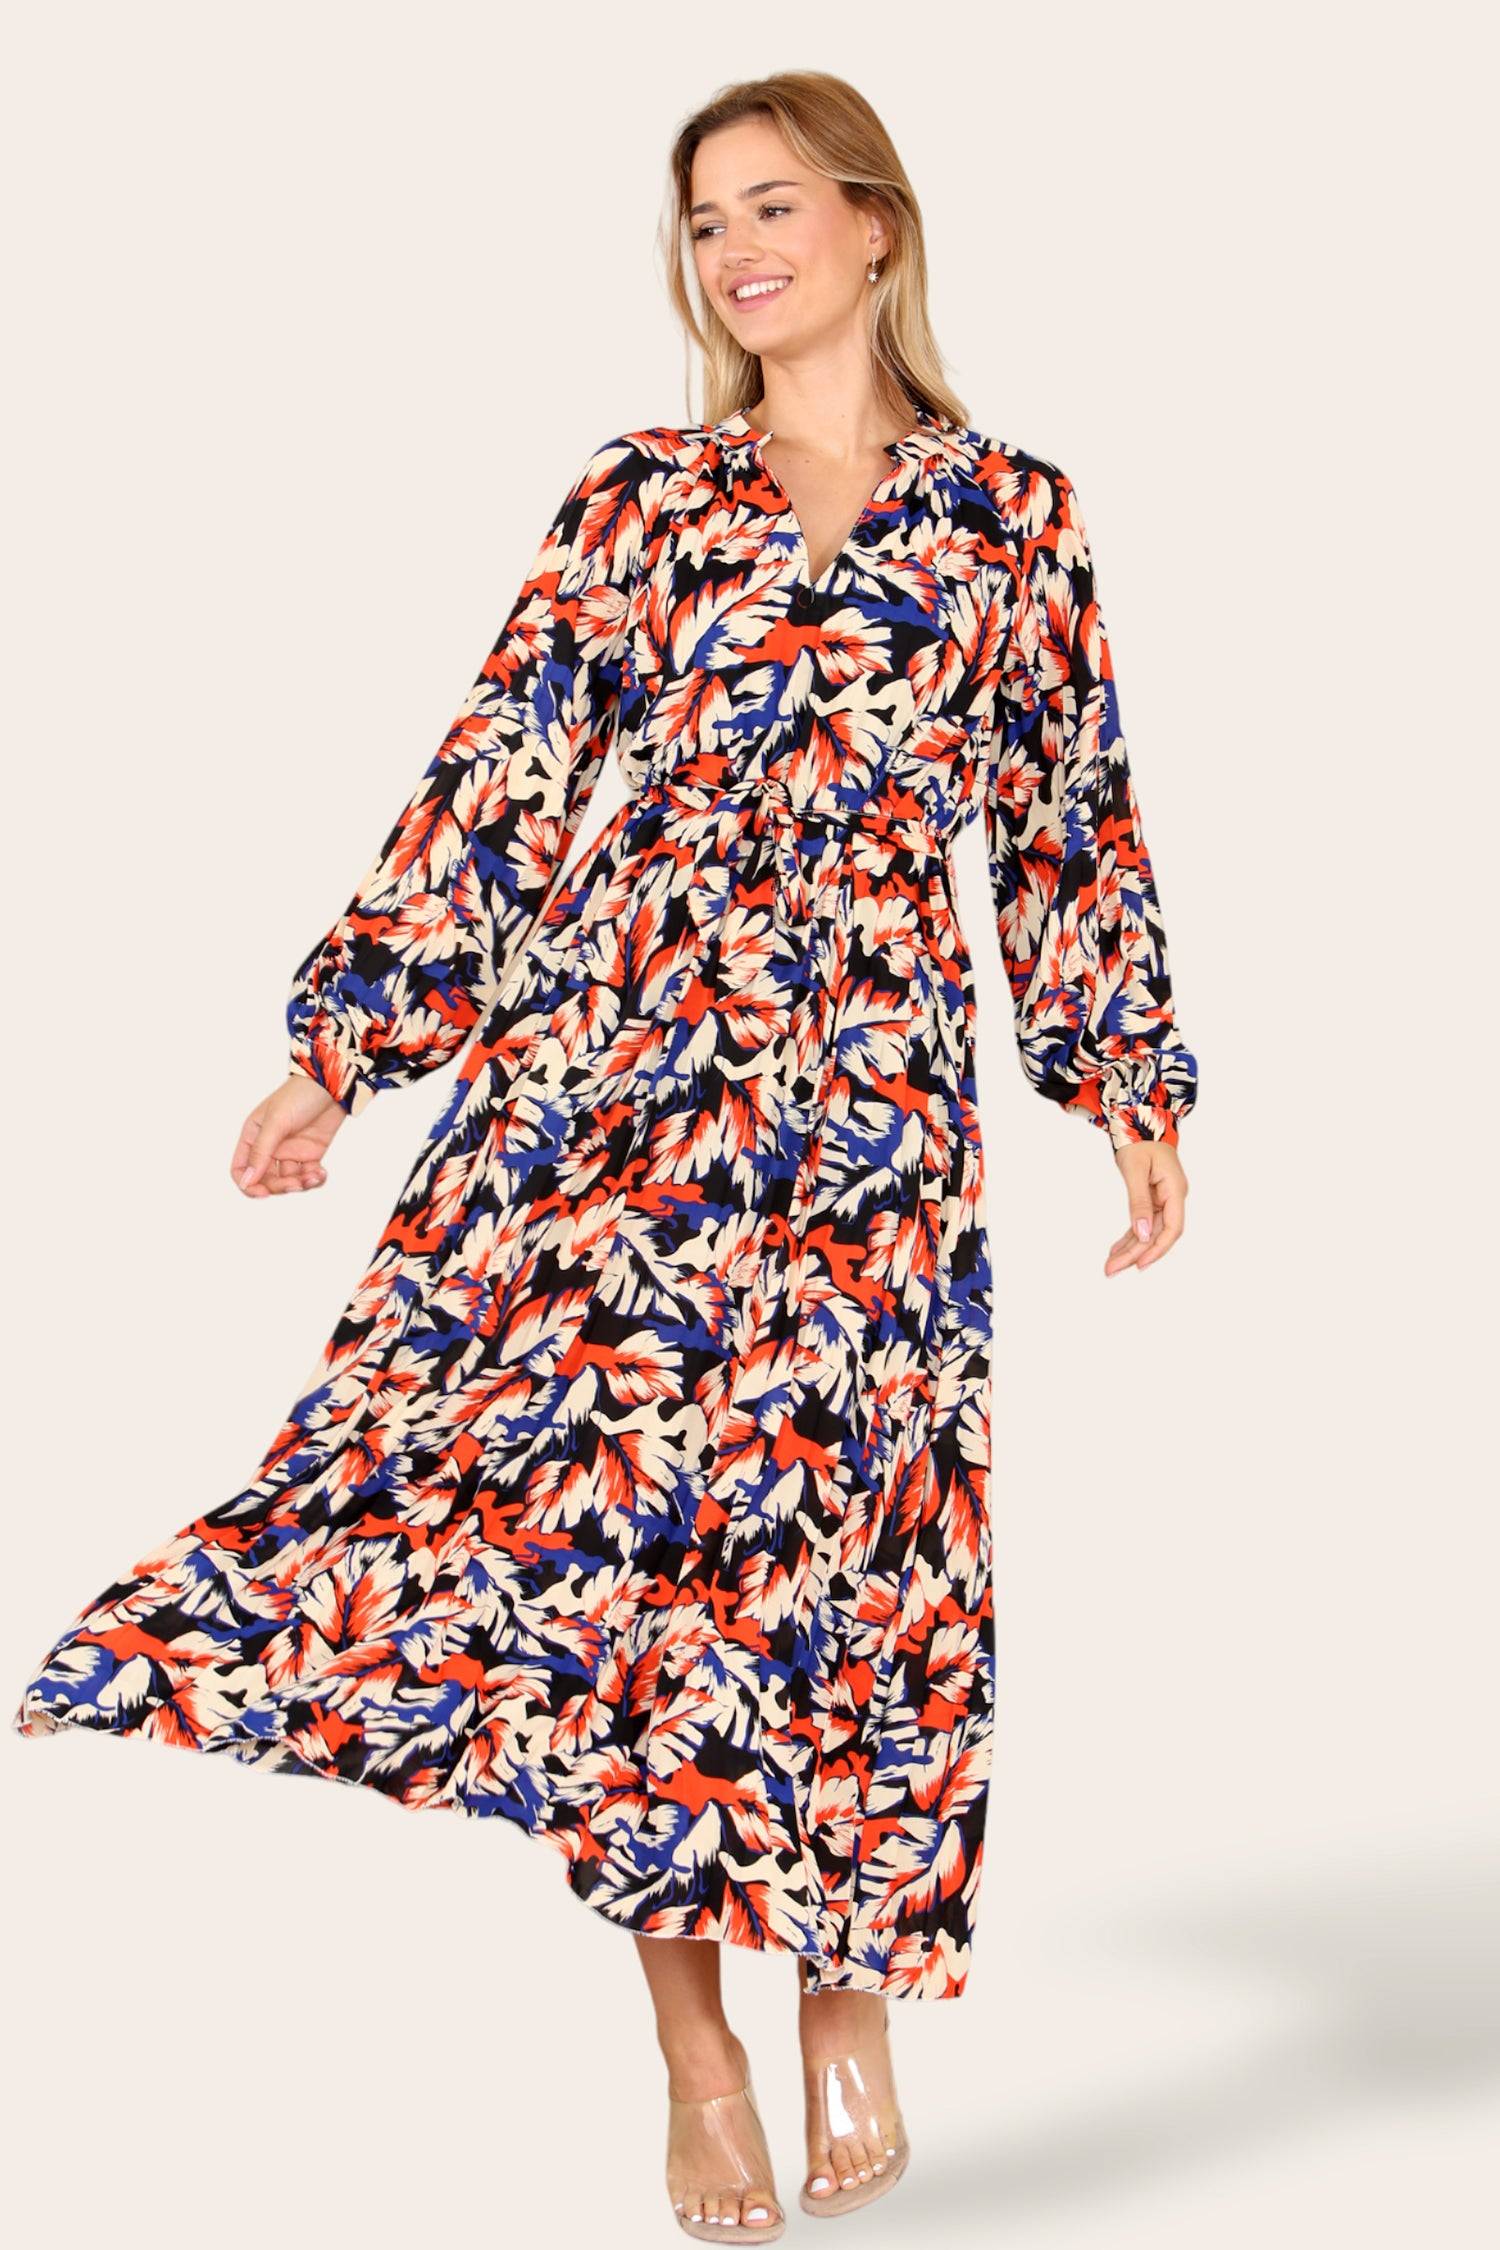 Love Sunshine Abstract Leaf Printed Belted Pleated Maxi Dress Dress with Pockets Garden Party Dress Holiday Dress Long Sleeve Dress LS-2329 Summer Dress Wedding Guest Dress